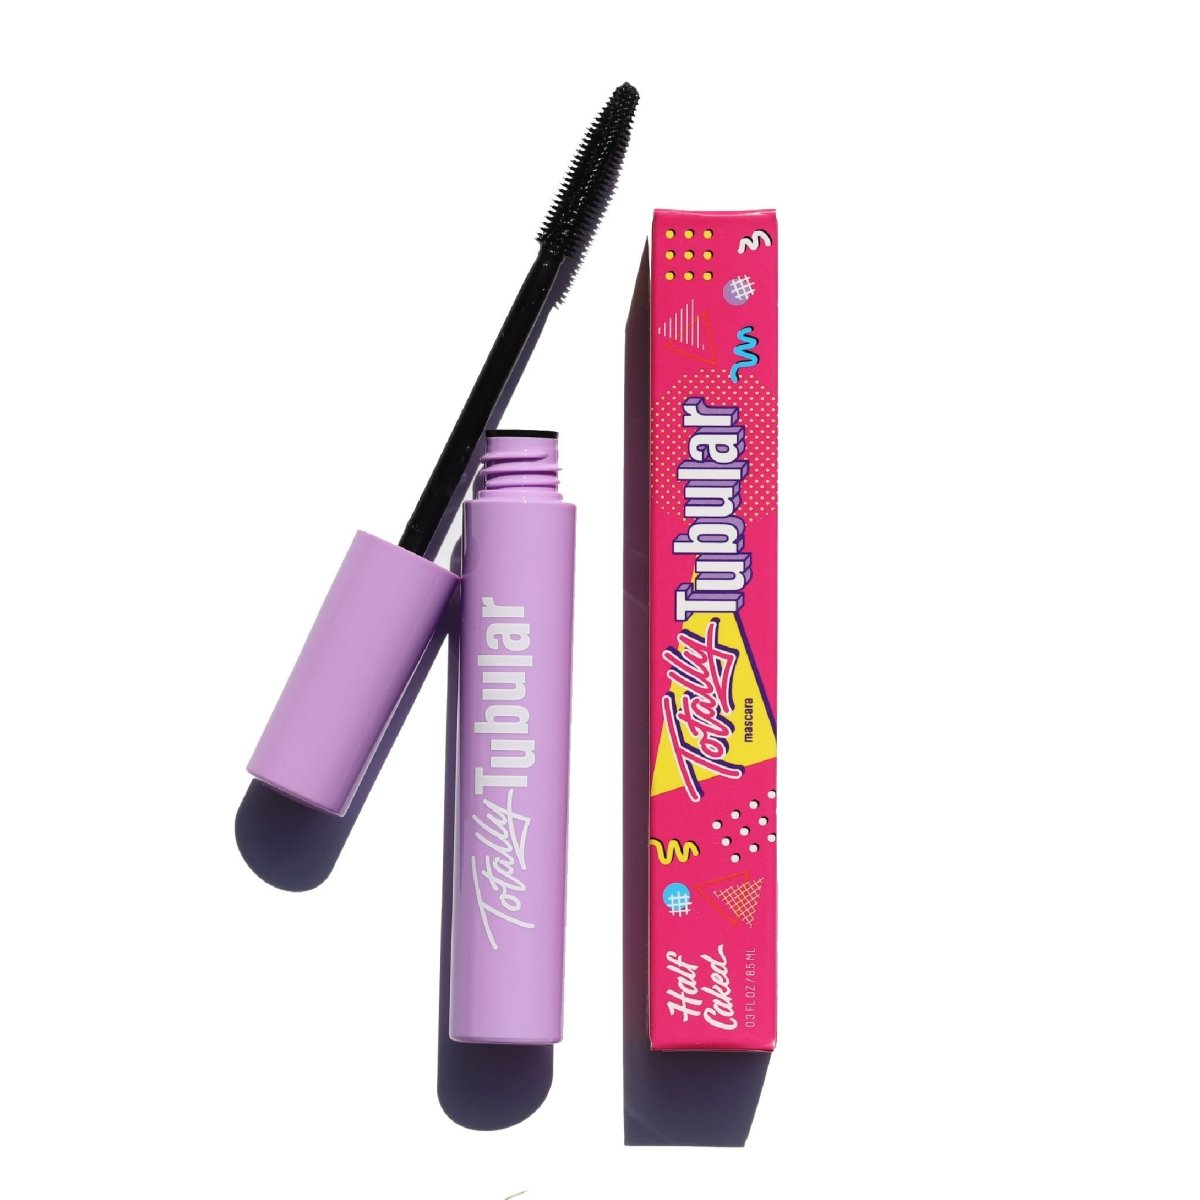 open purple mascara tube with black plastic cone applicator and pink box - totally tubular mascara, the heights - half caked makeup